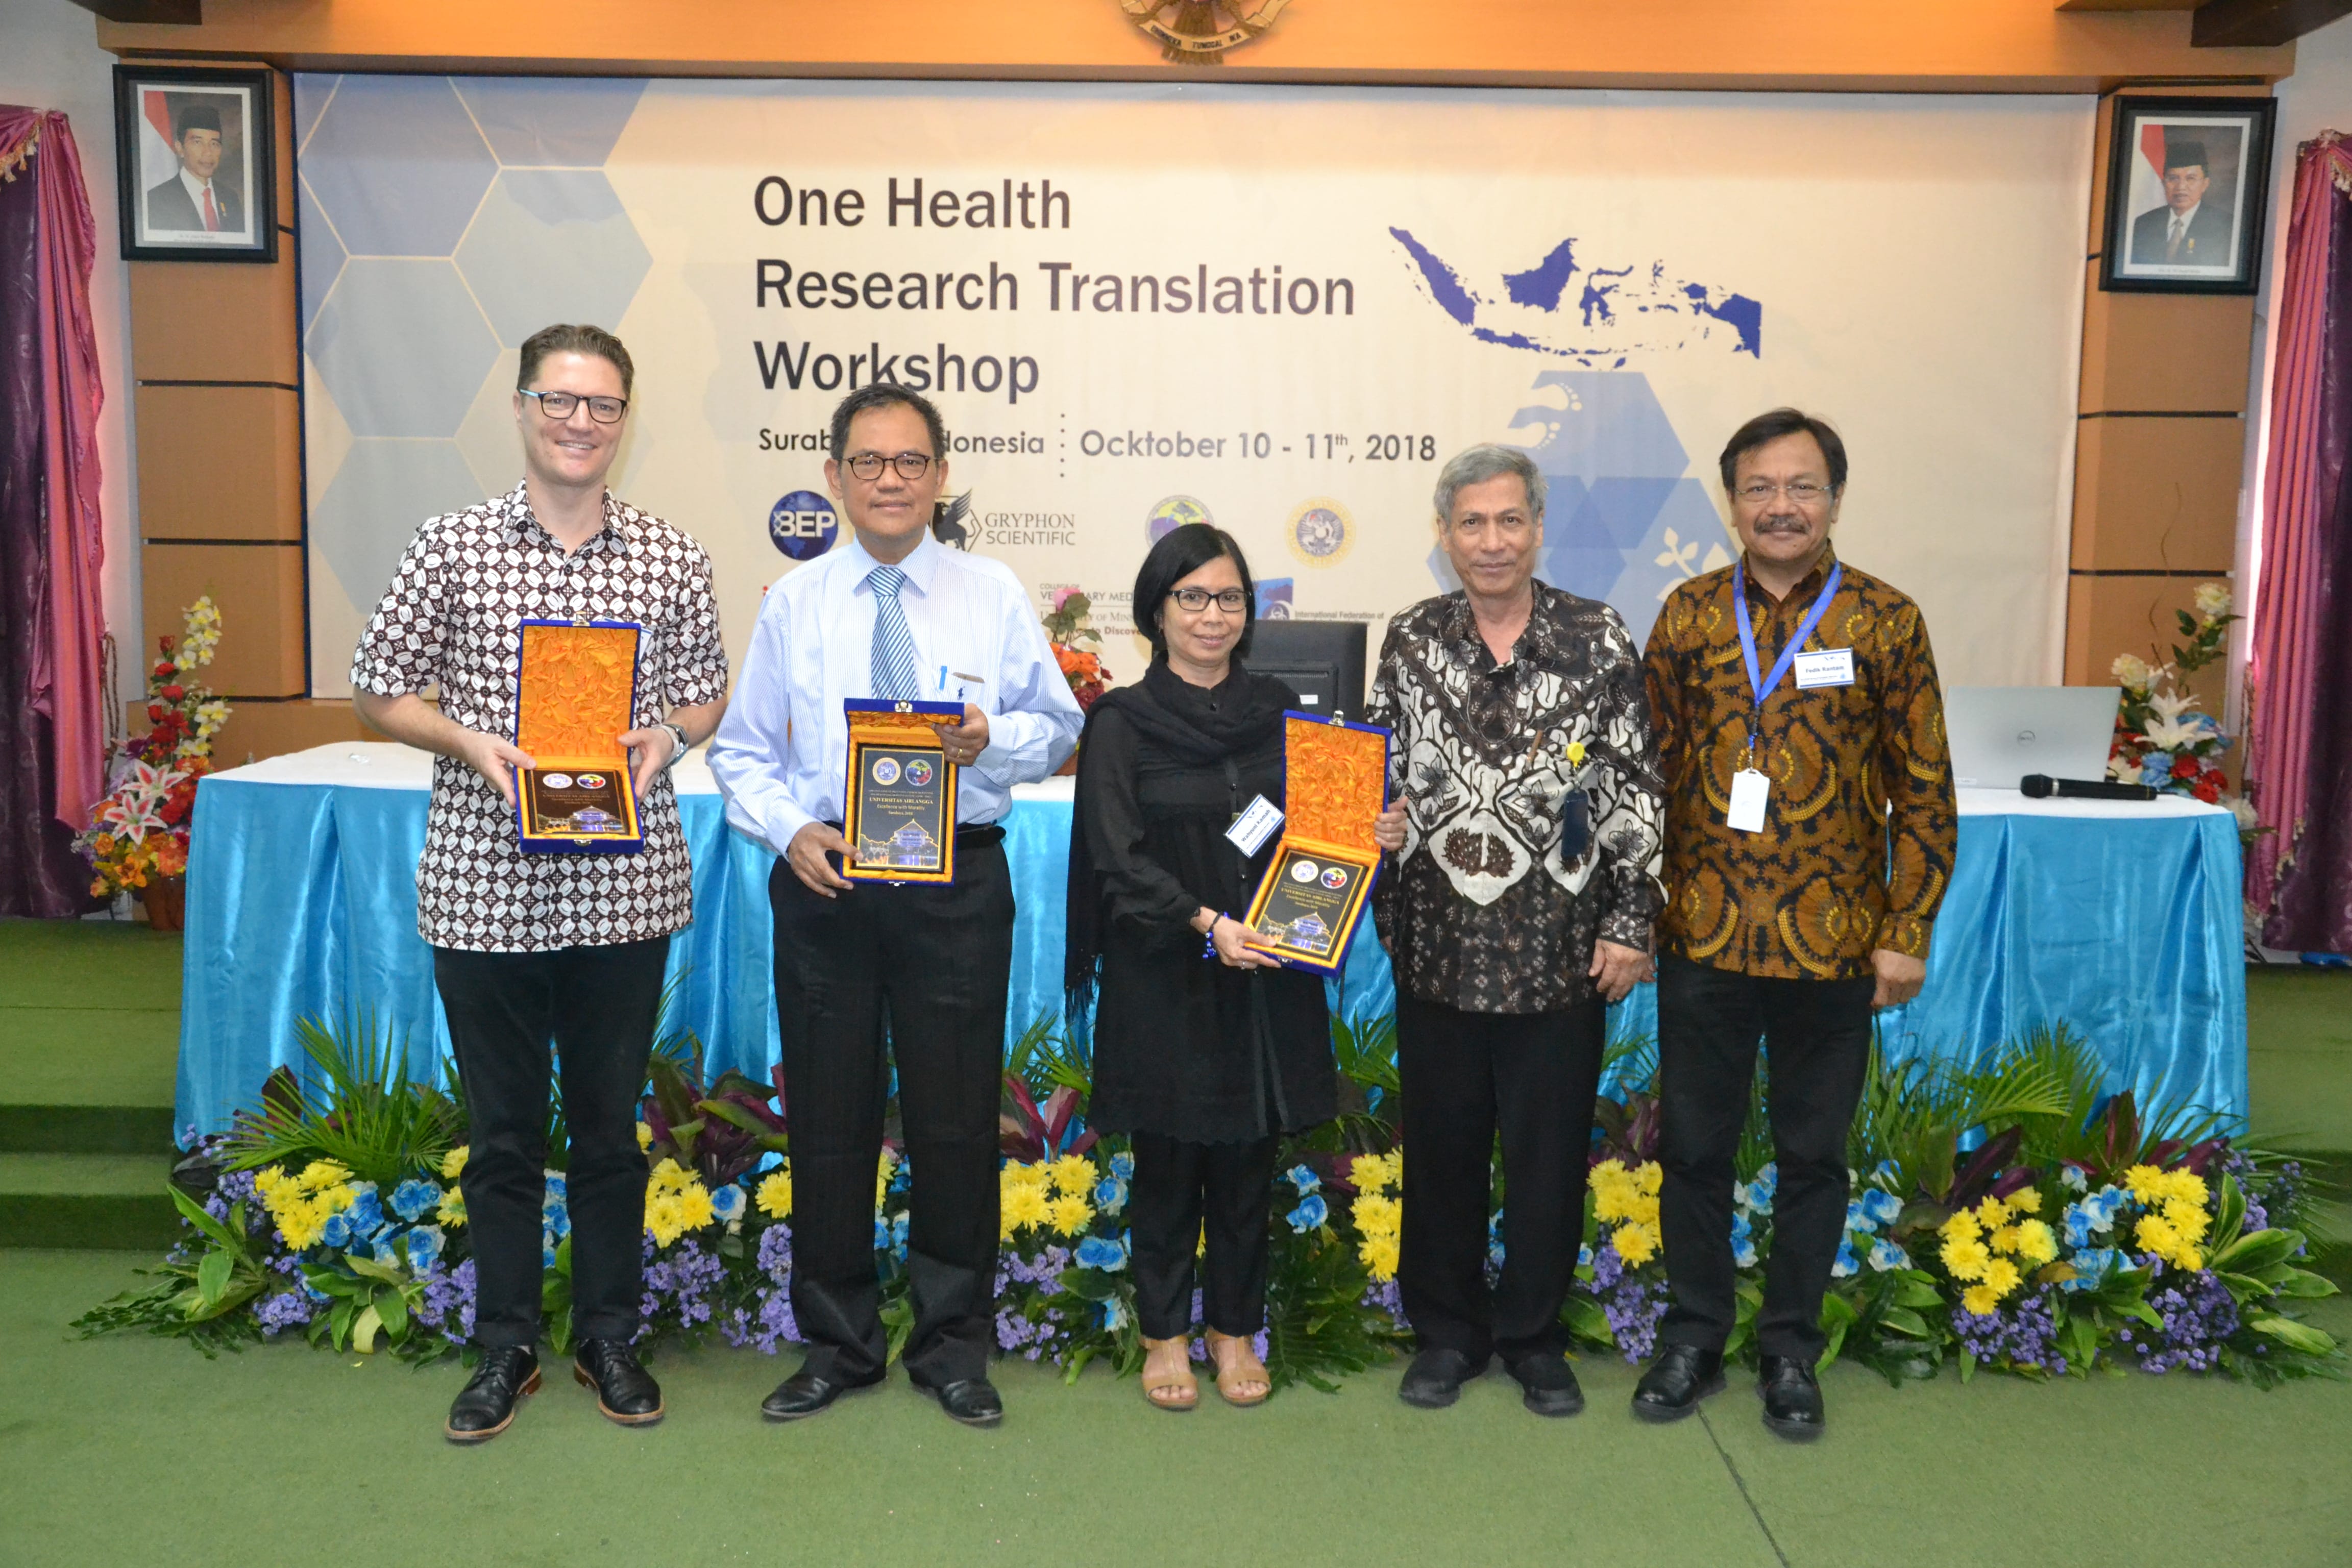 One Health Research Translation